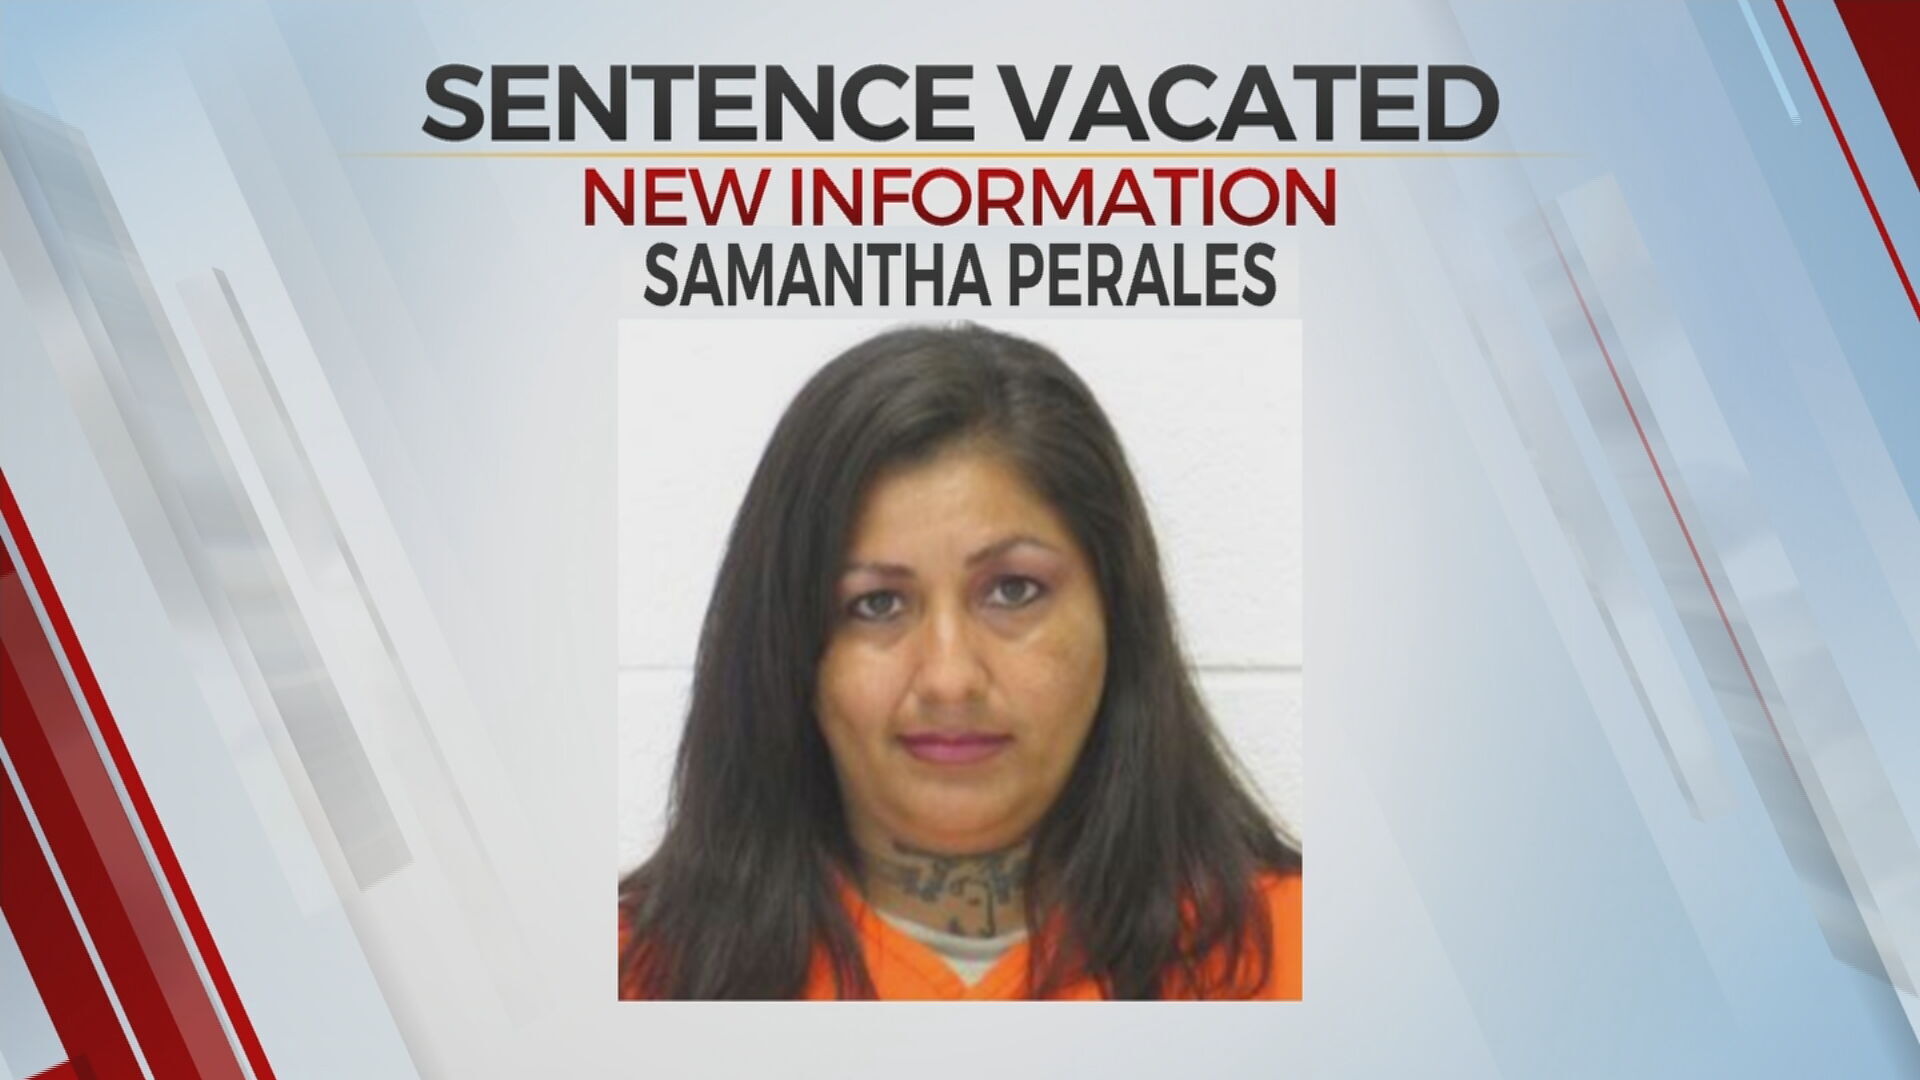 Woman’s Life Sentence For Manslaughter Vacated Due To Tribal Jurisdiction